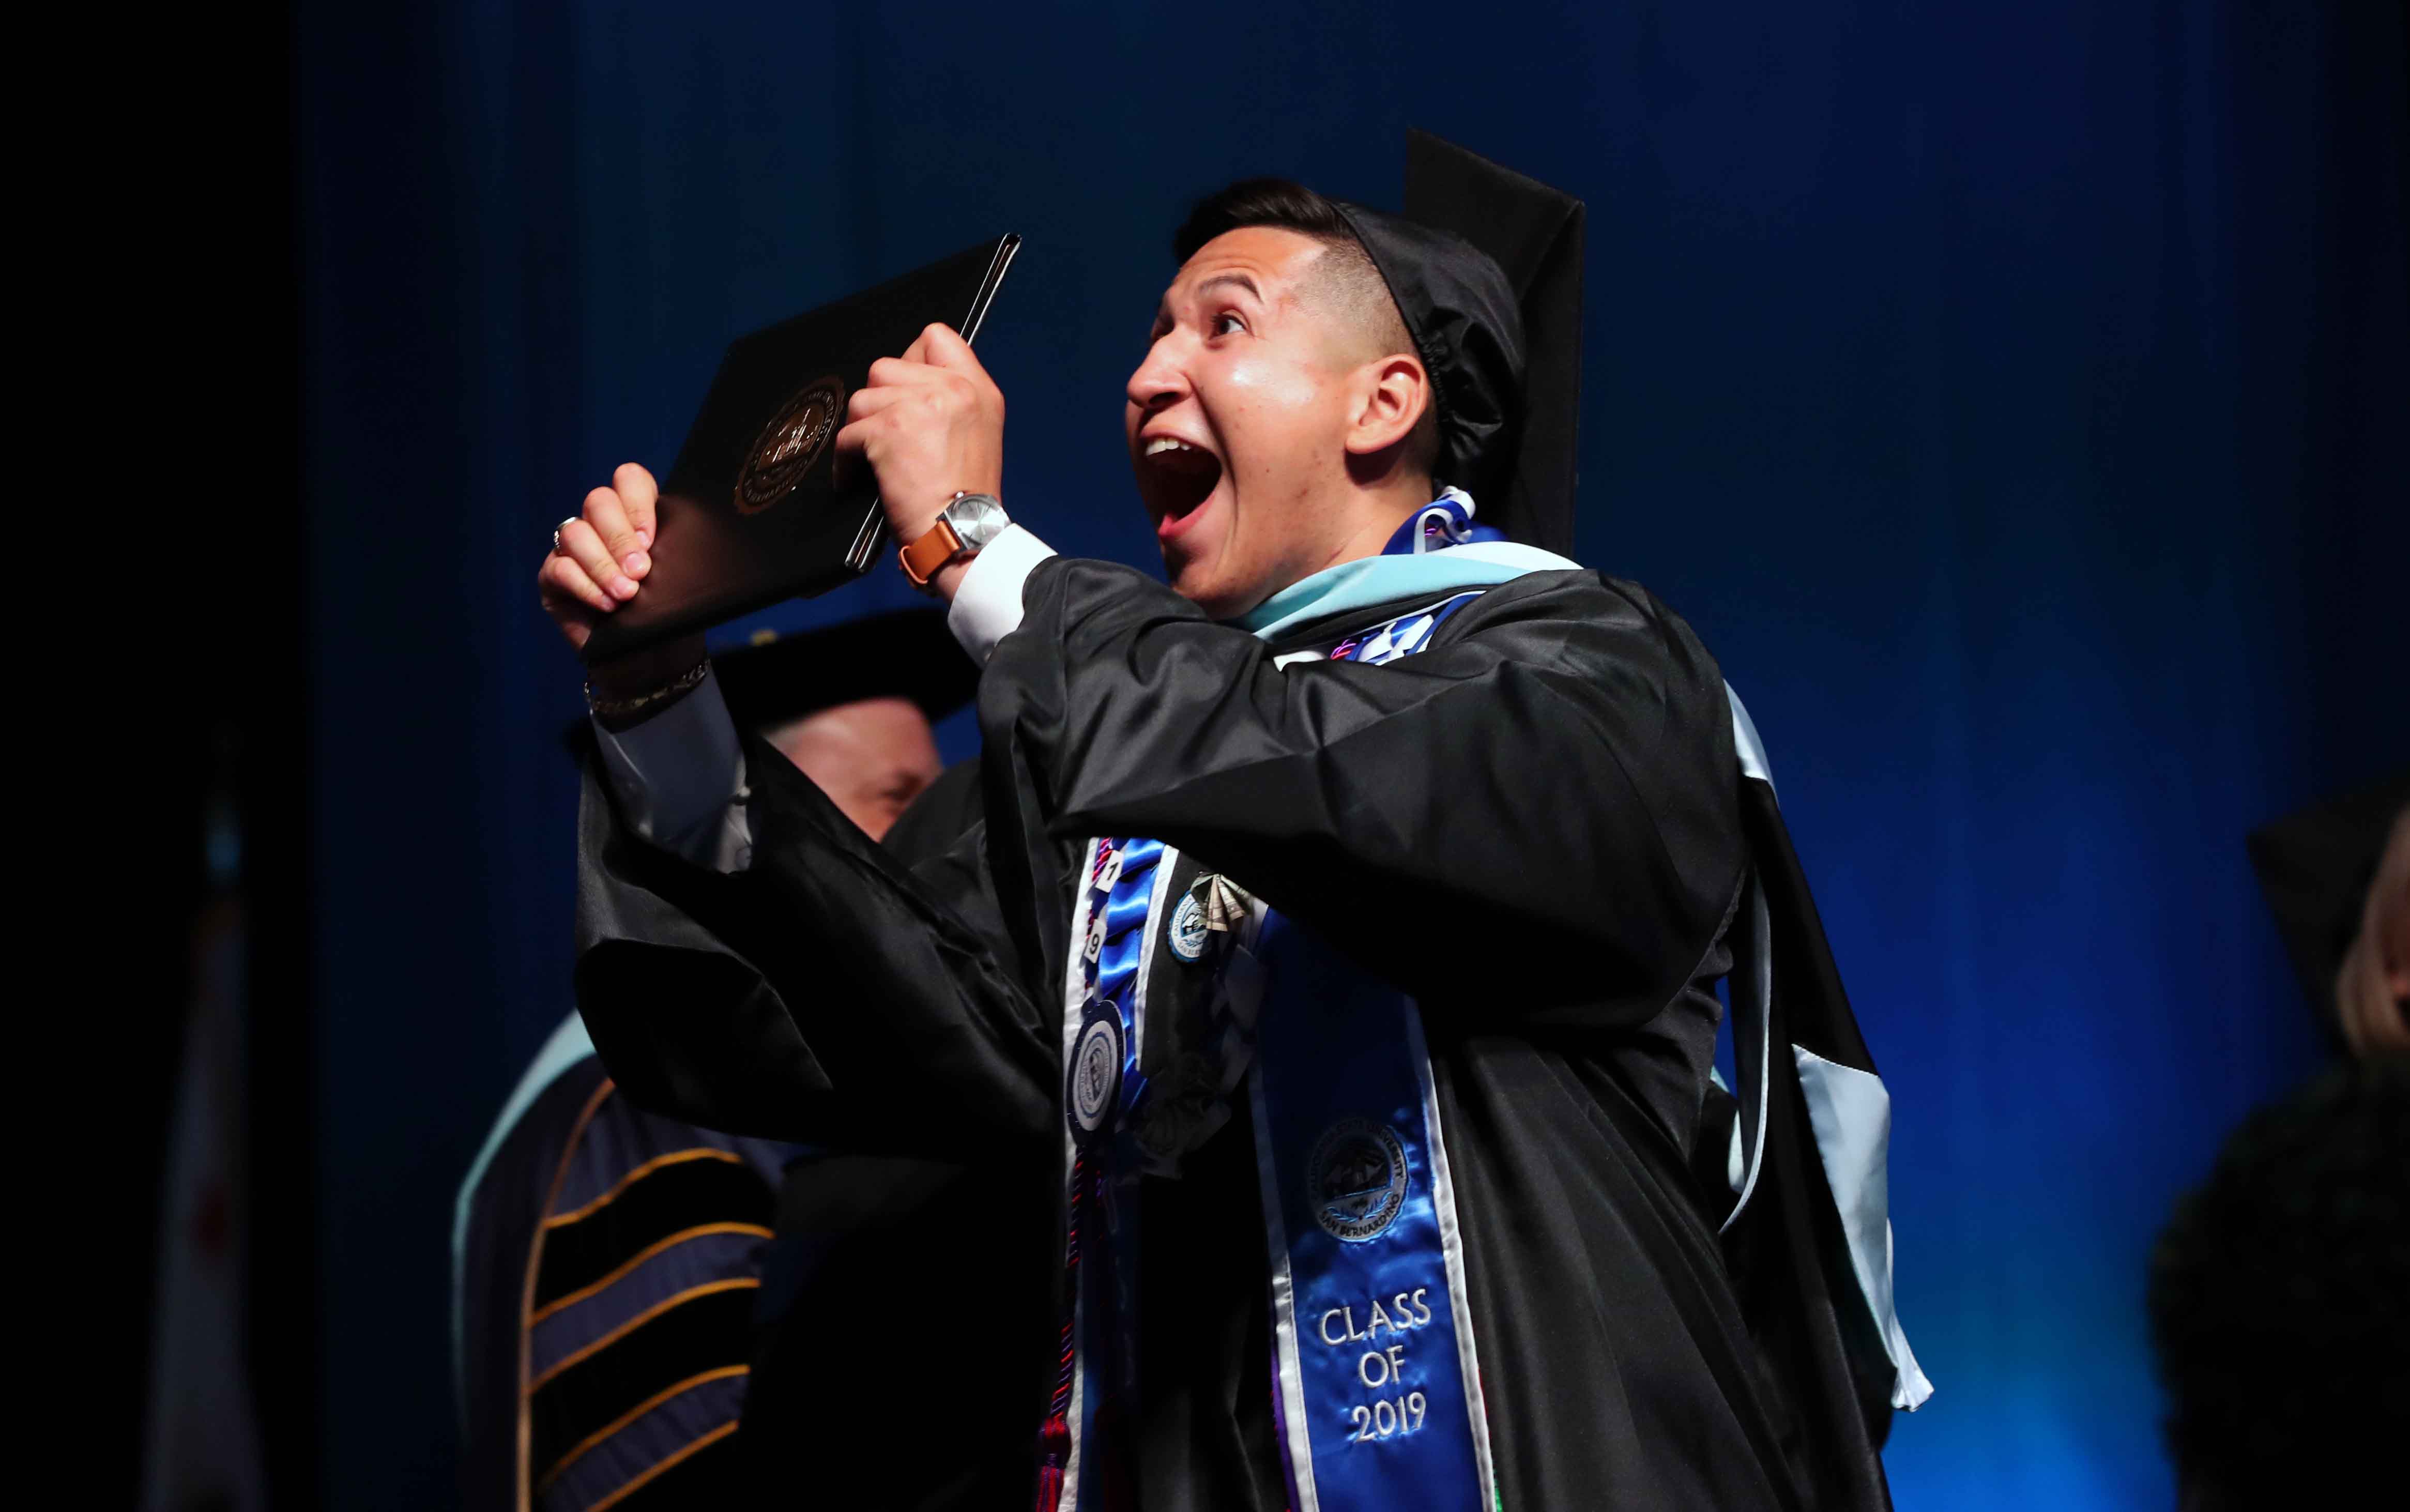 A student celebrates at one of four CSUSB commencement ceremonies at Toyota Arena